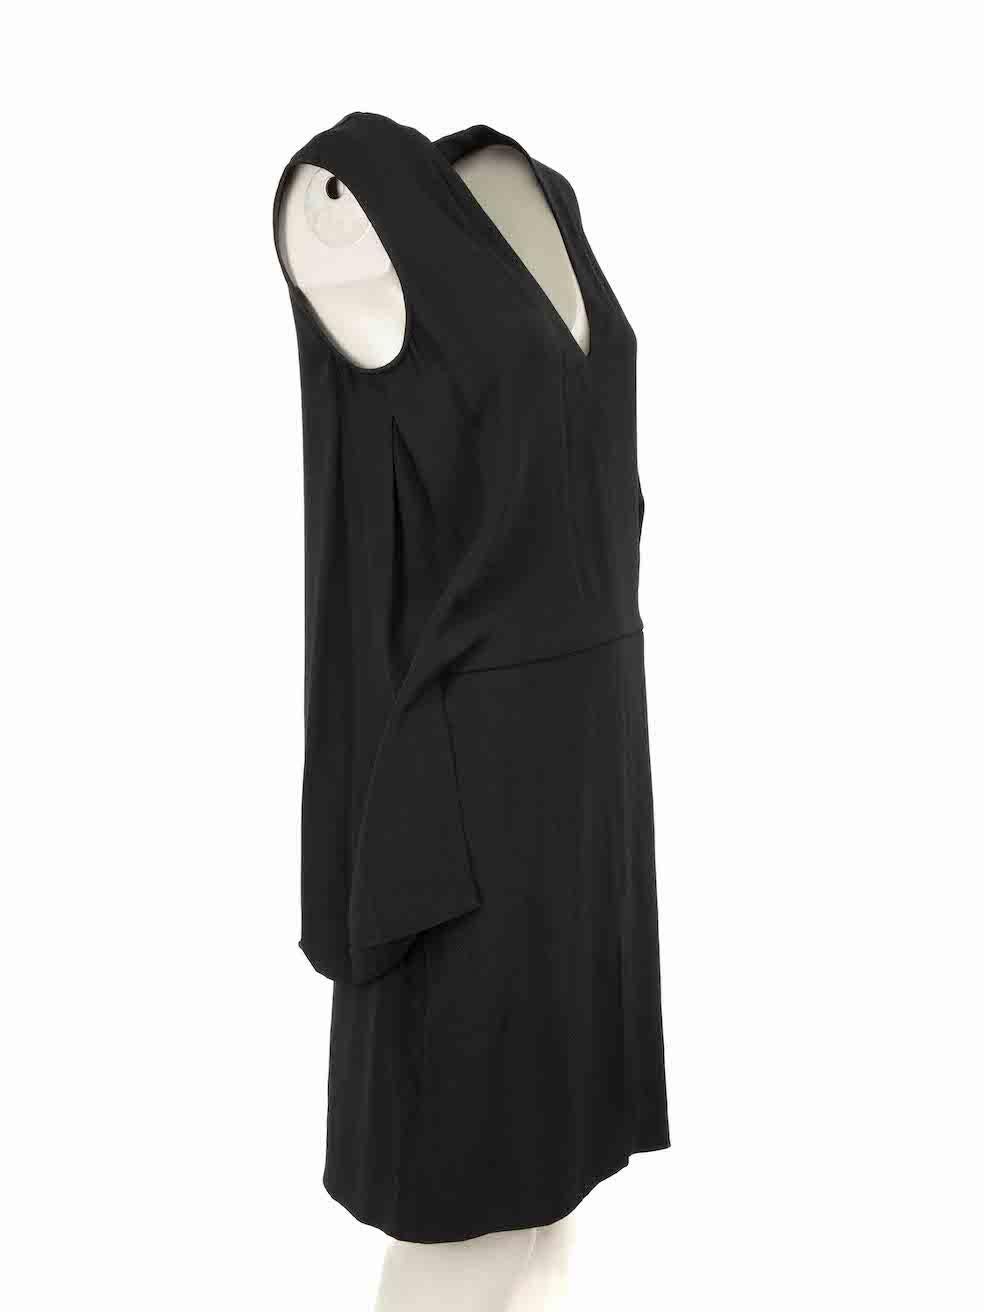 CONDITION is Very good. Minimal wear to dress is evident. Minor pull to seam on front and back of skirt. Loose threads to the right sleeve hem lining on this used Stella McCartney designer resale item.
 
Details
Black
Synthetic
Mini dress
V